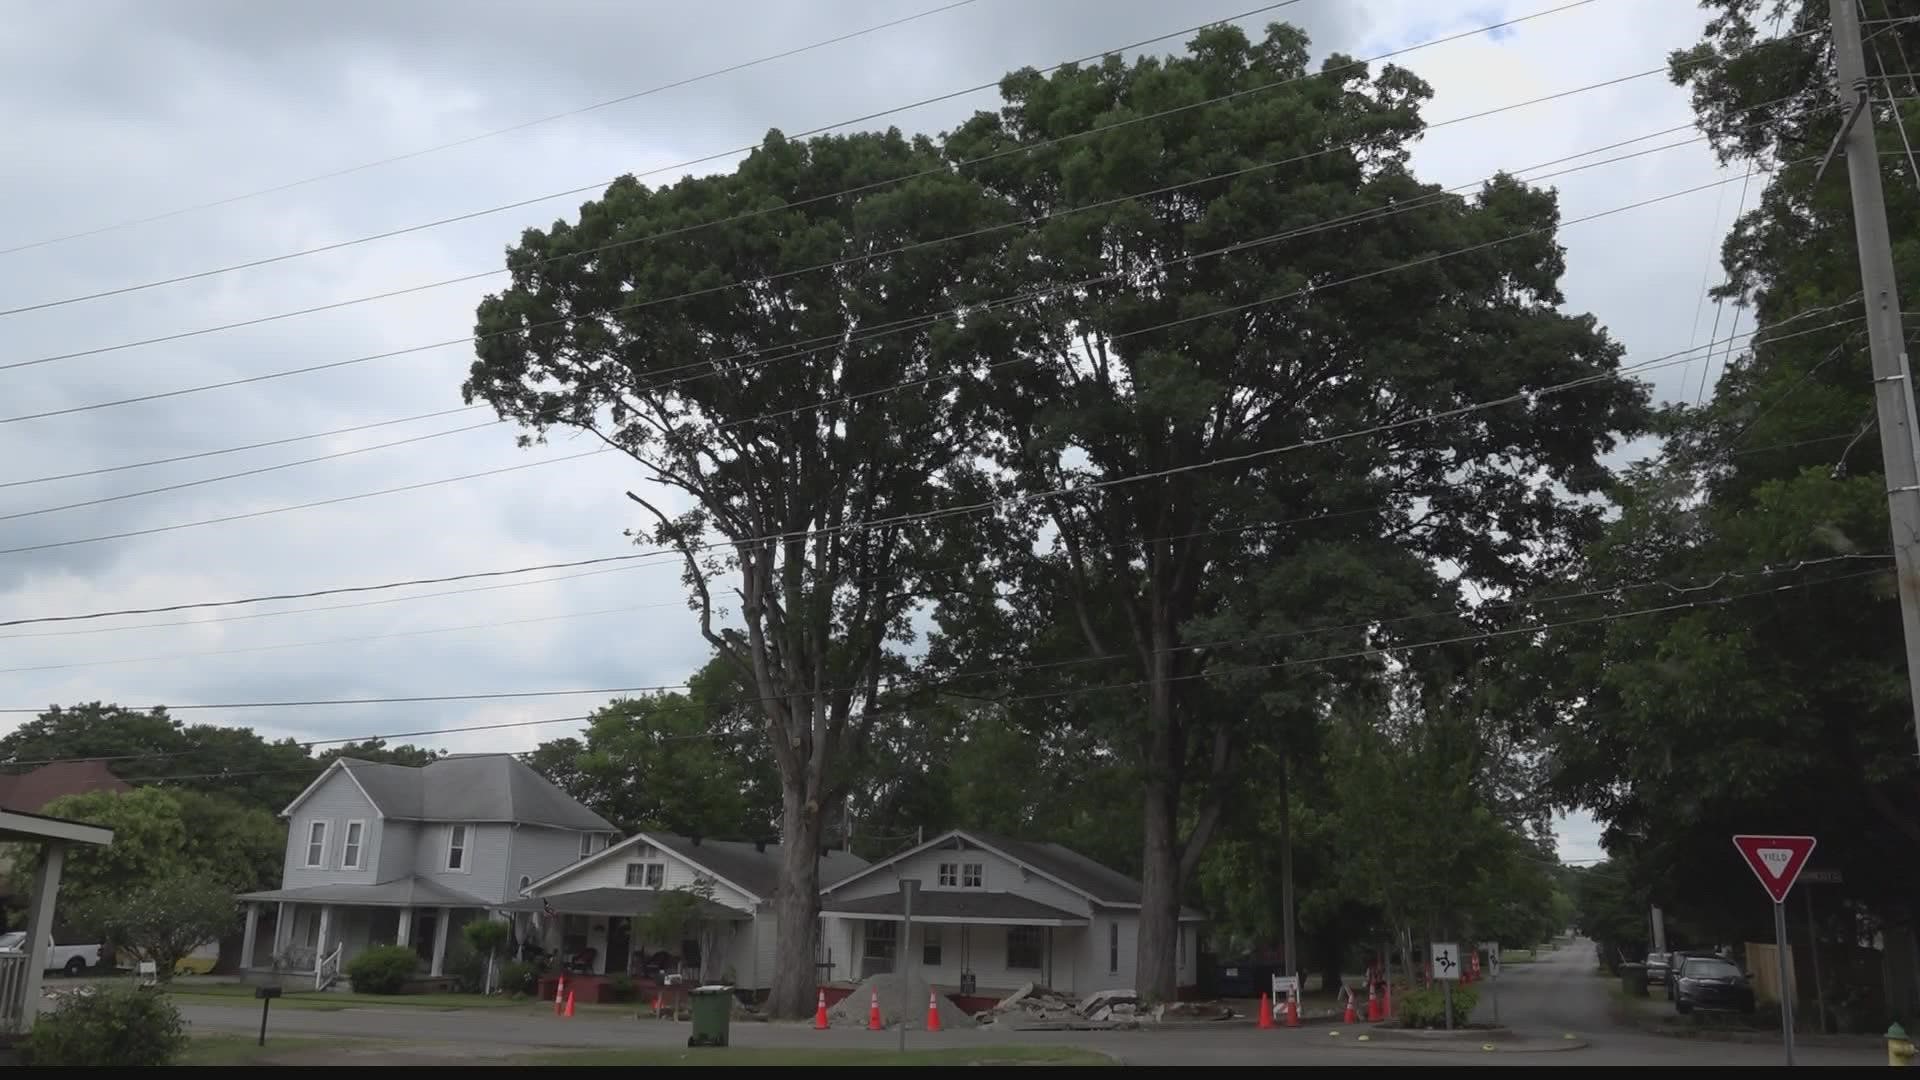 Folks in the Five Points area are upset that a very large and very old oak tree may have to be cut down by the city in order to complete this new project.